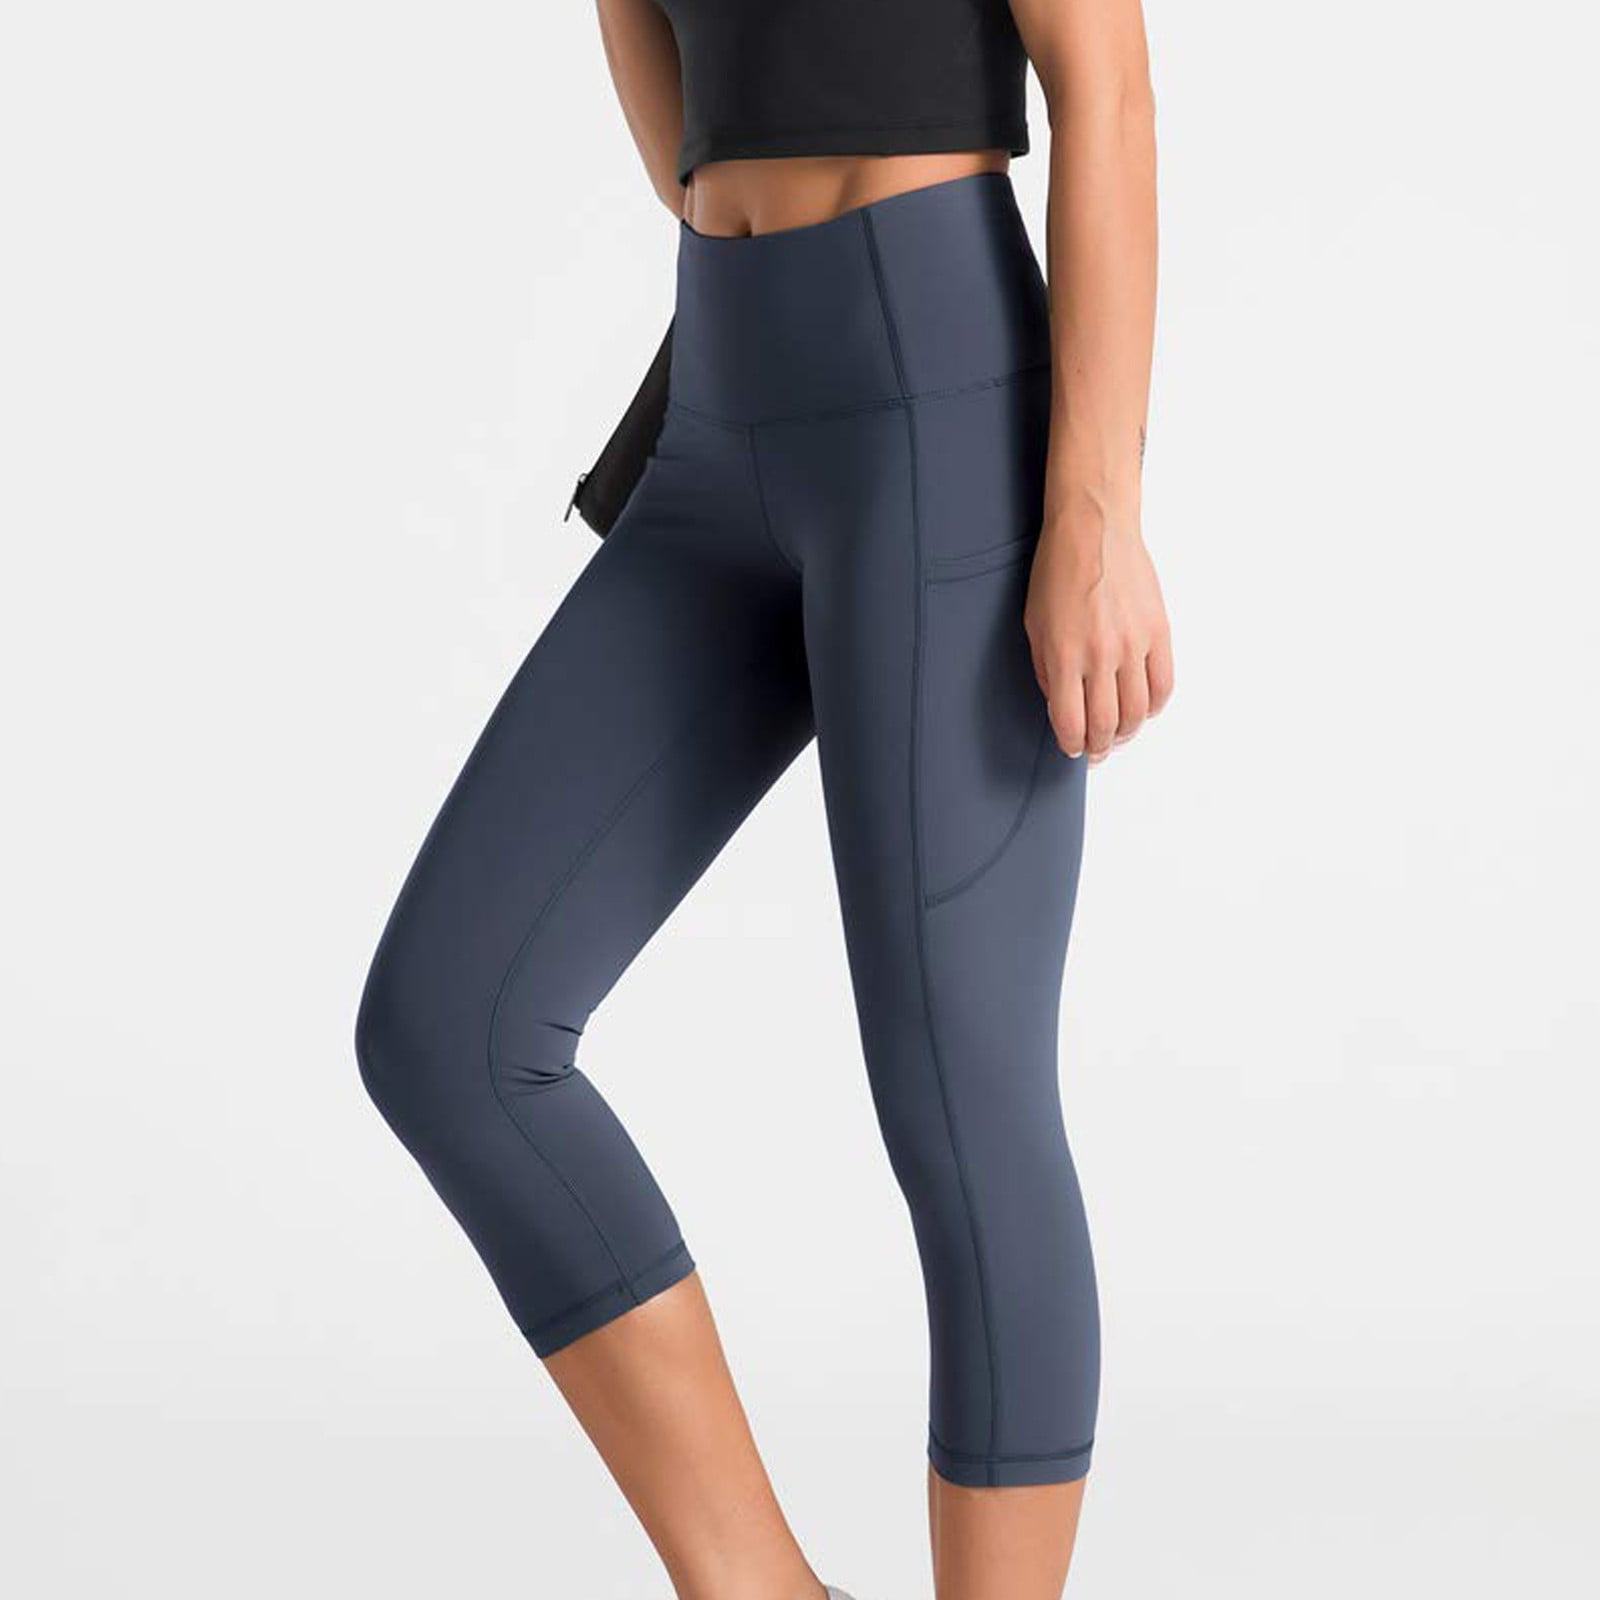 Details about   Womens Stretch Yoga Leggings Fitness Running Gym Sports Lady Active Long Pants £ 